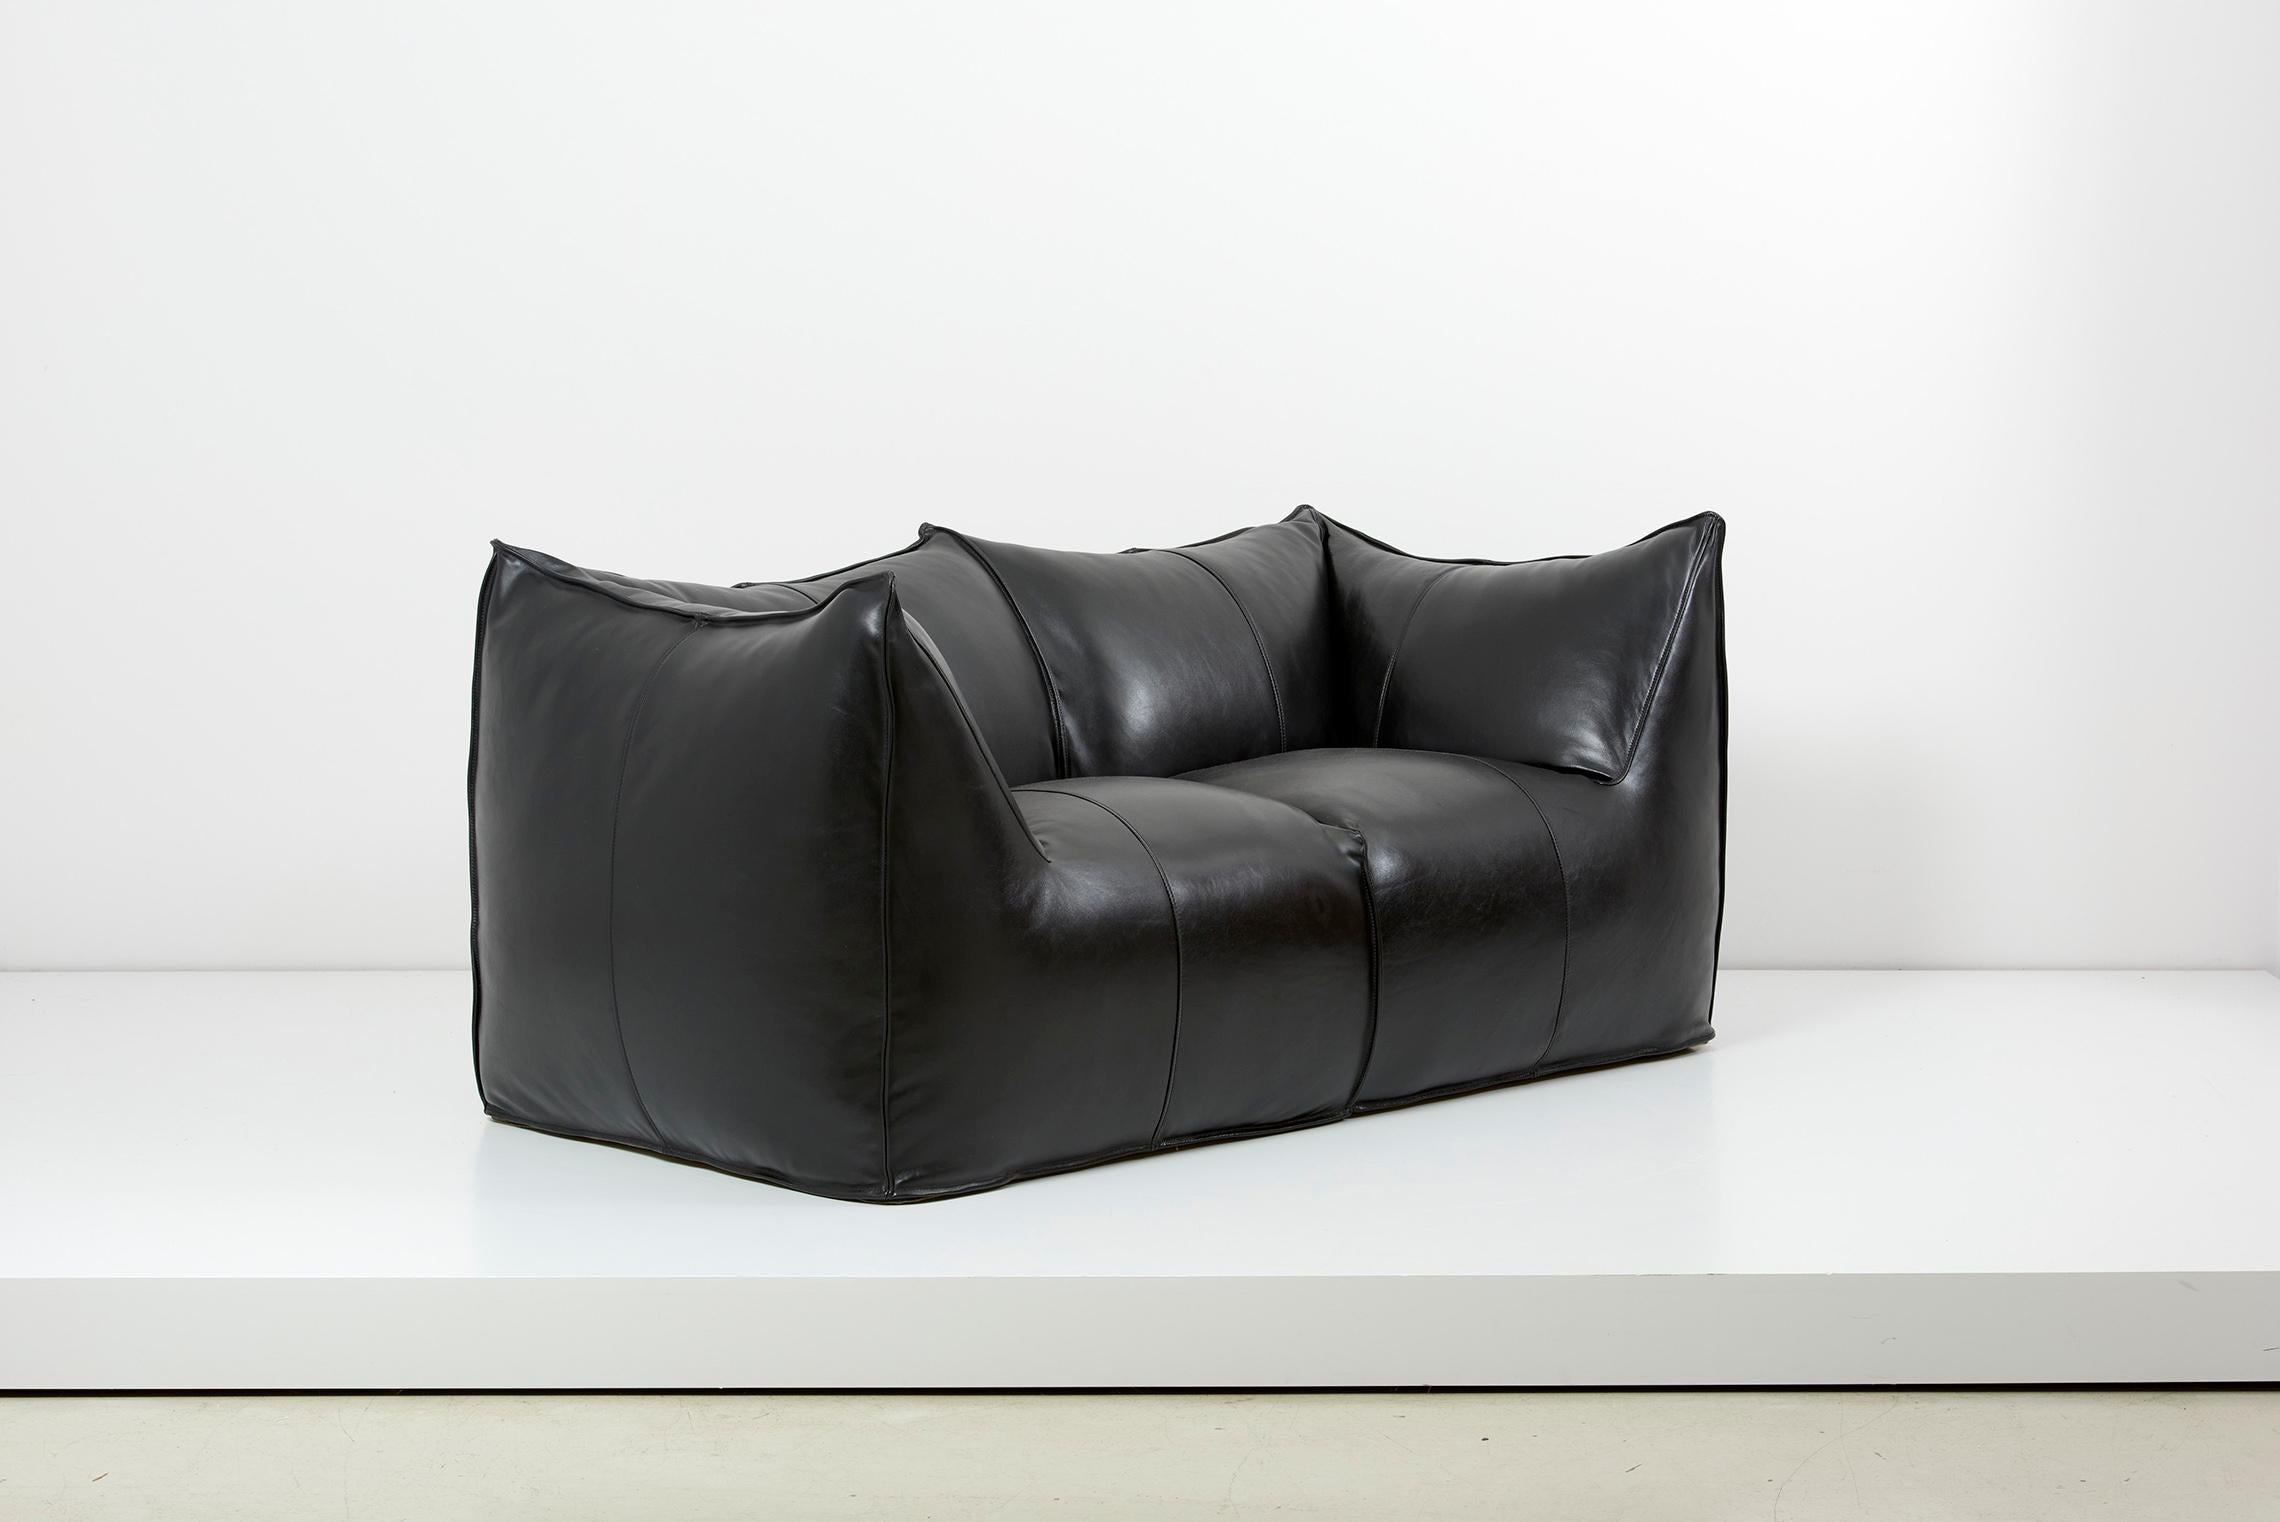 'Le Bambole' 2-seat sofa, designed in 1970s by Mario Bellini and manufactured by B&B Italia in Italy.
New upholstered in black leather.